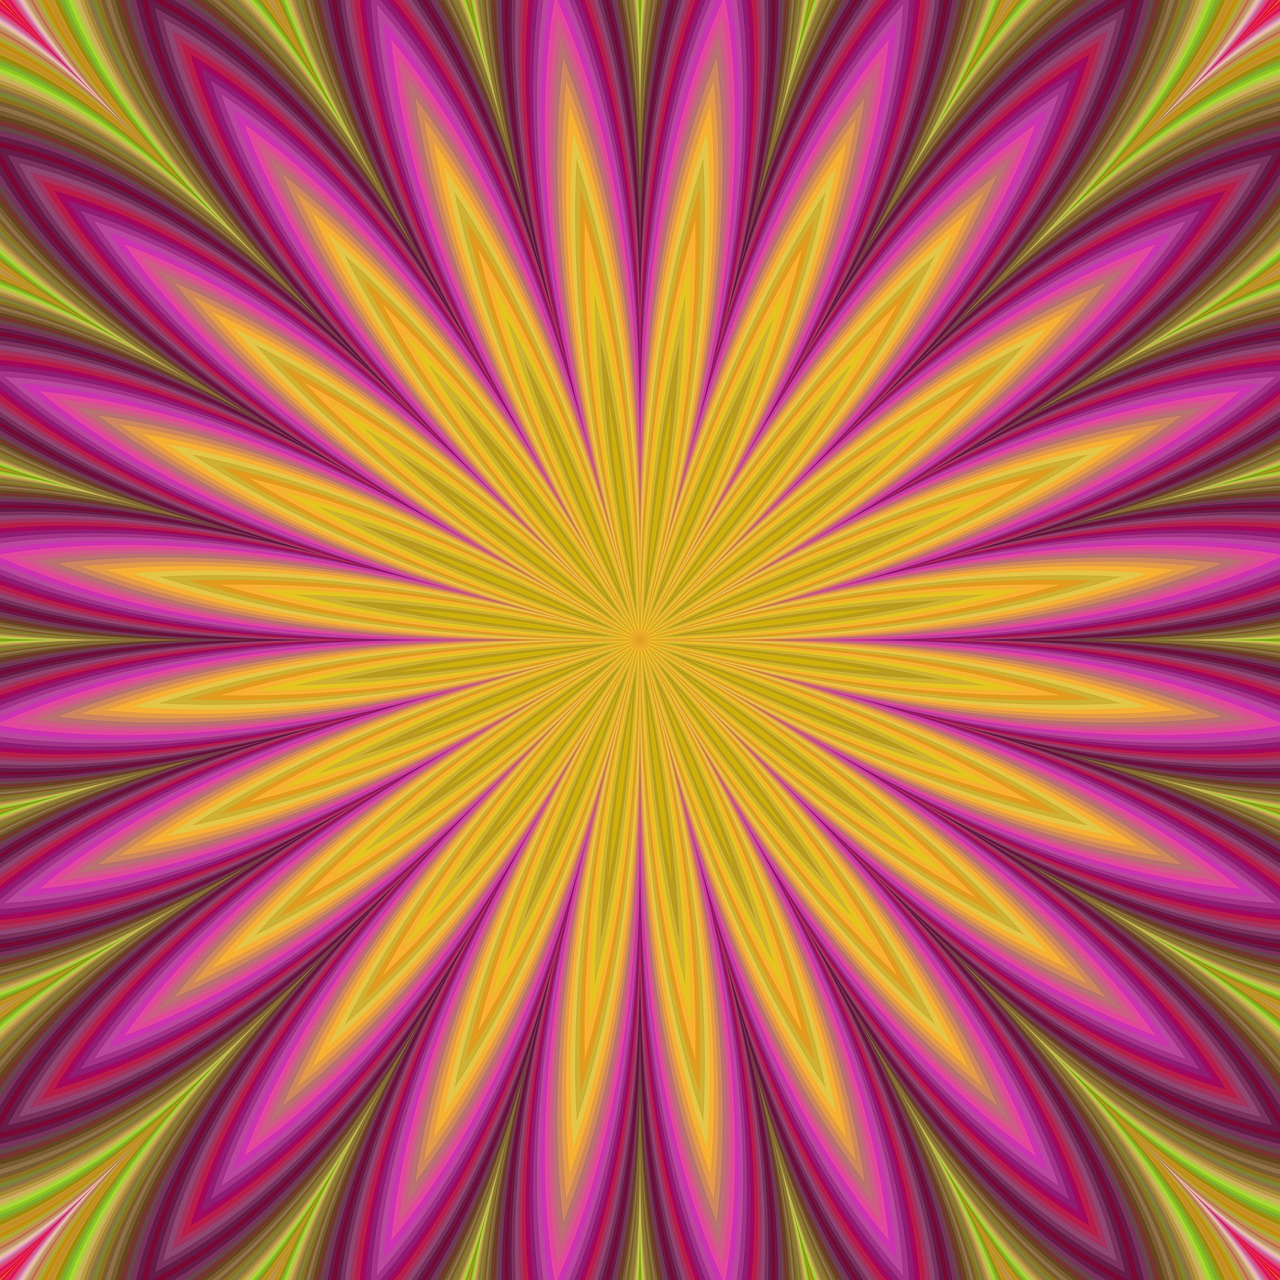 a computer generated image of a flower, inspired by Kenneth Noland, psychedelic art, hot pink and gold color scheme, amazing background, high definition screenshot, sunburst